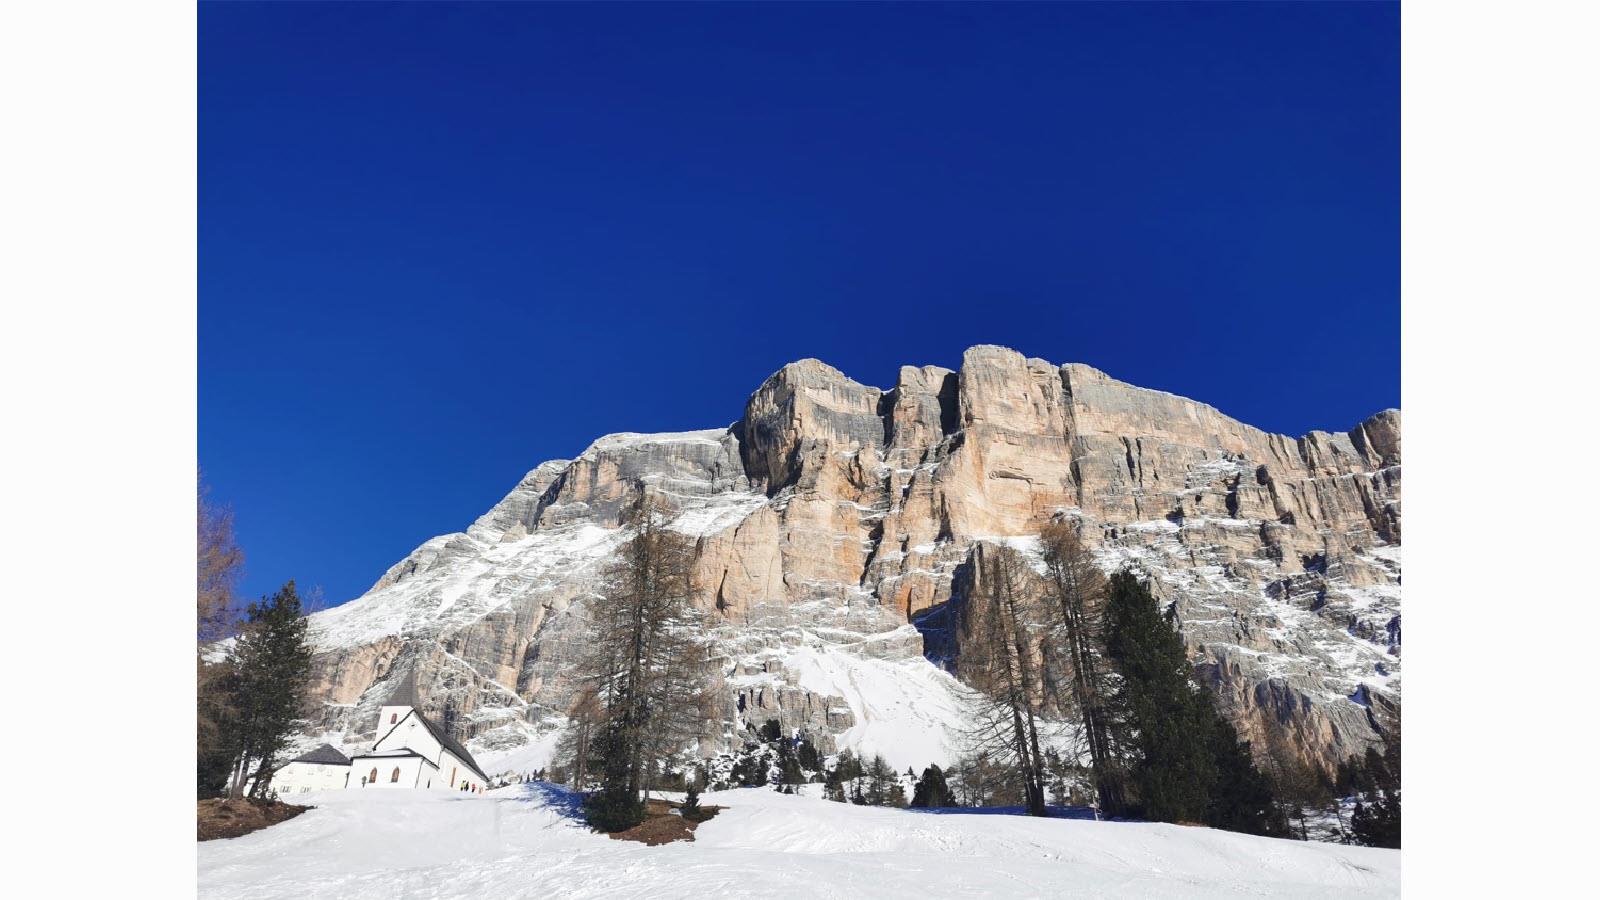 Santa Croce Mountain in Italy with snow and cloudless blue sky